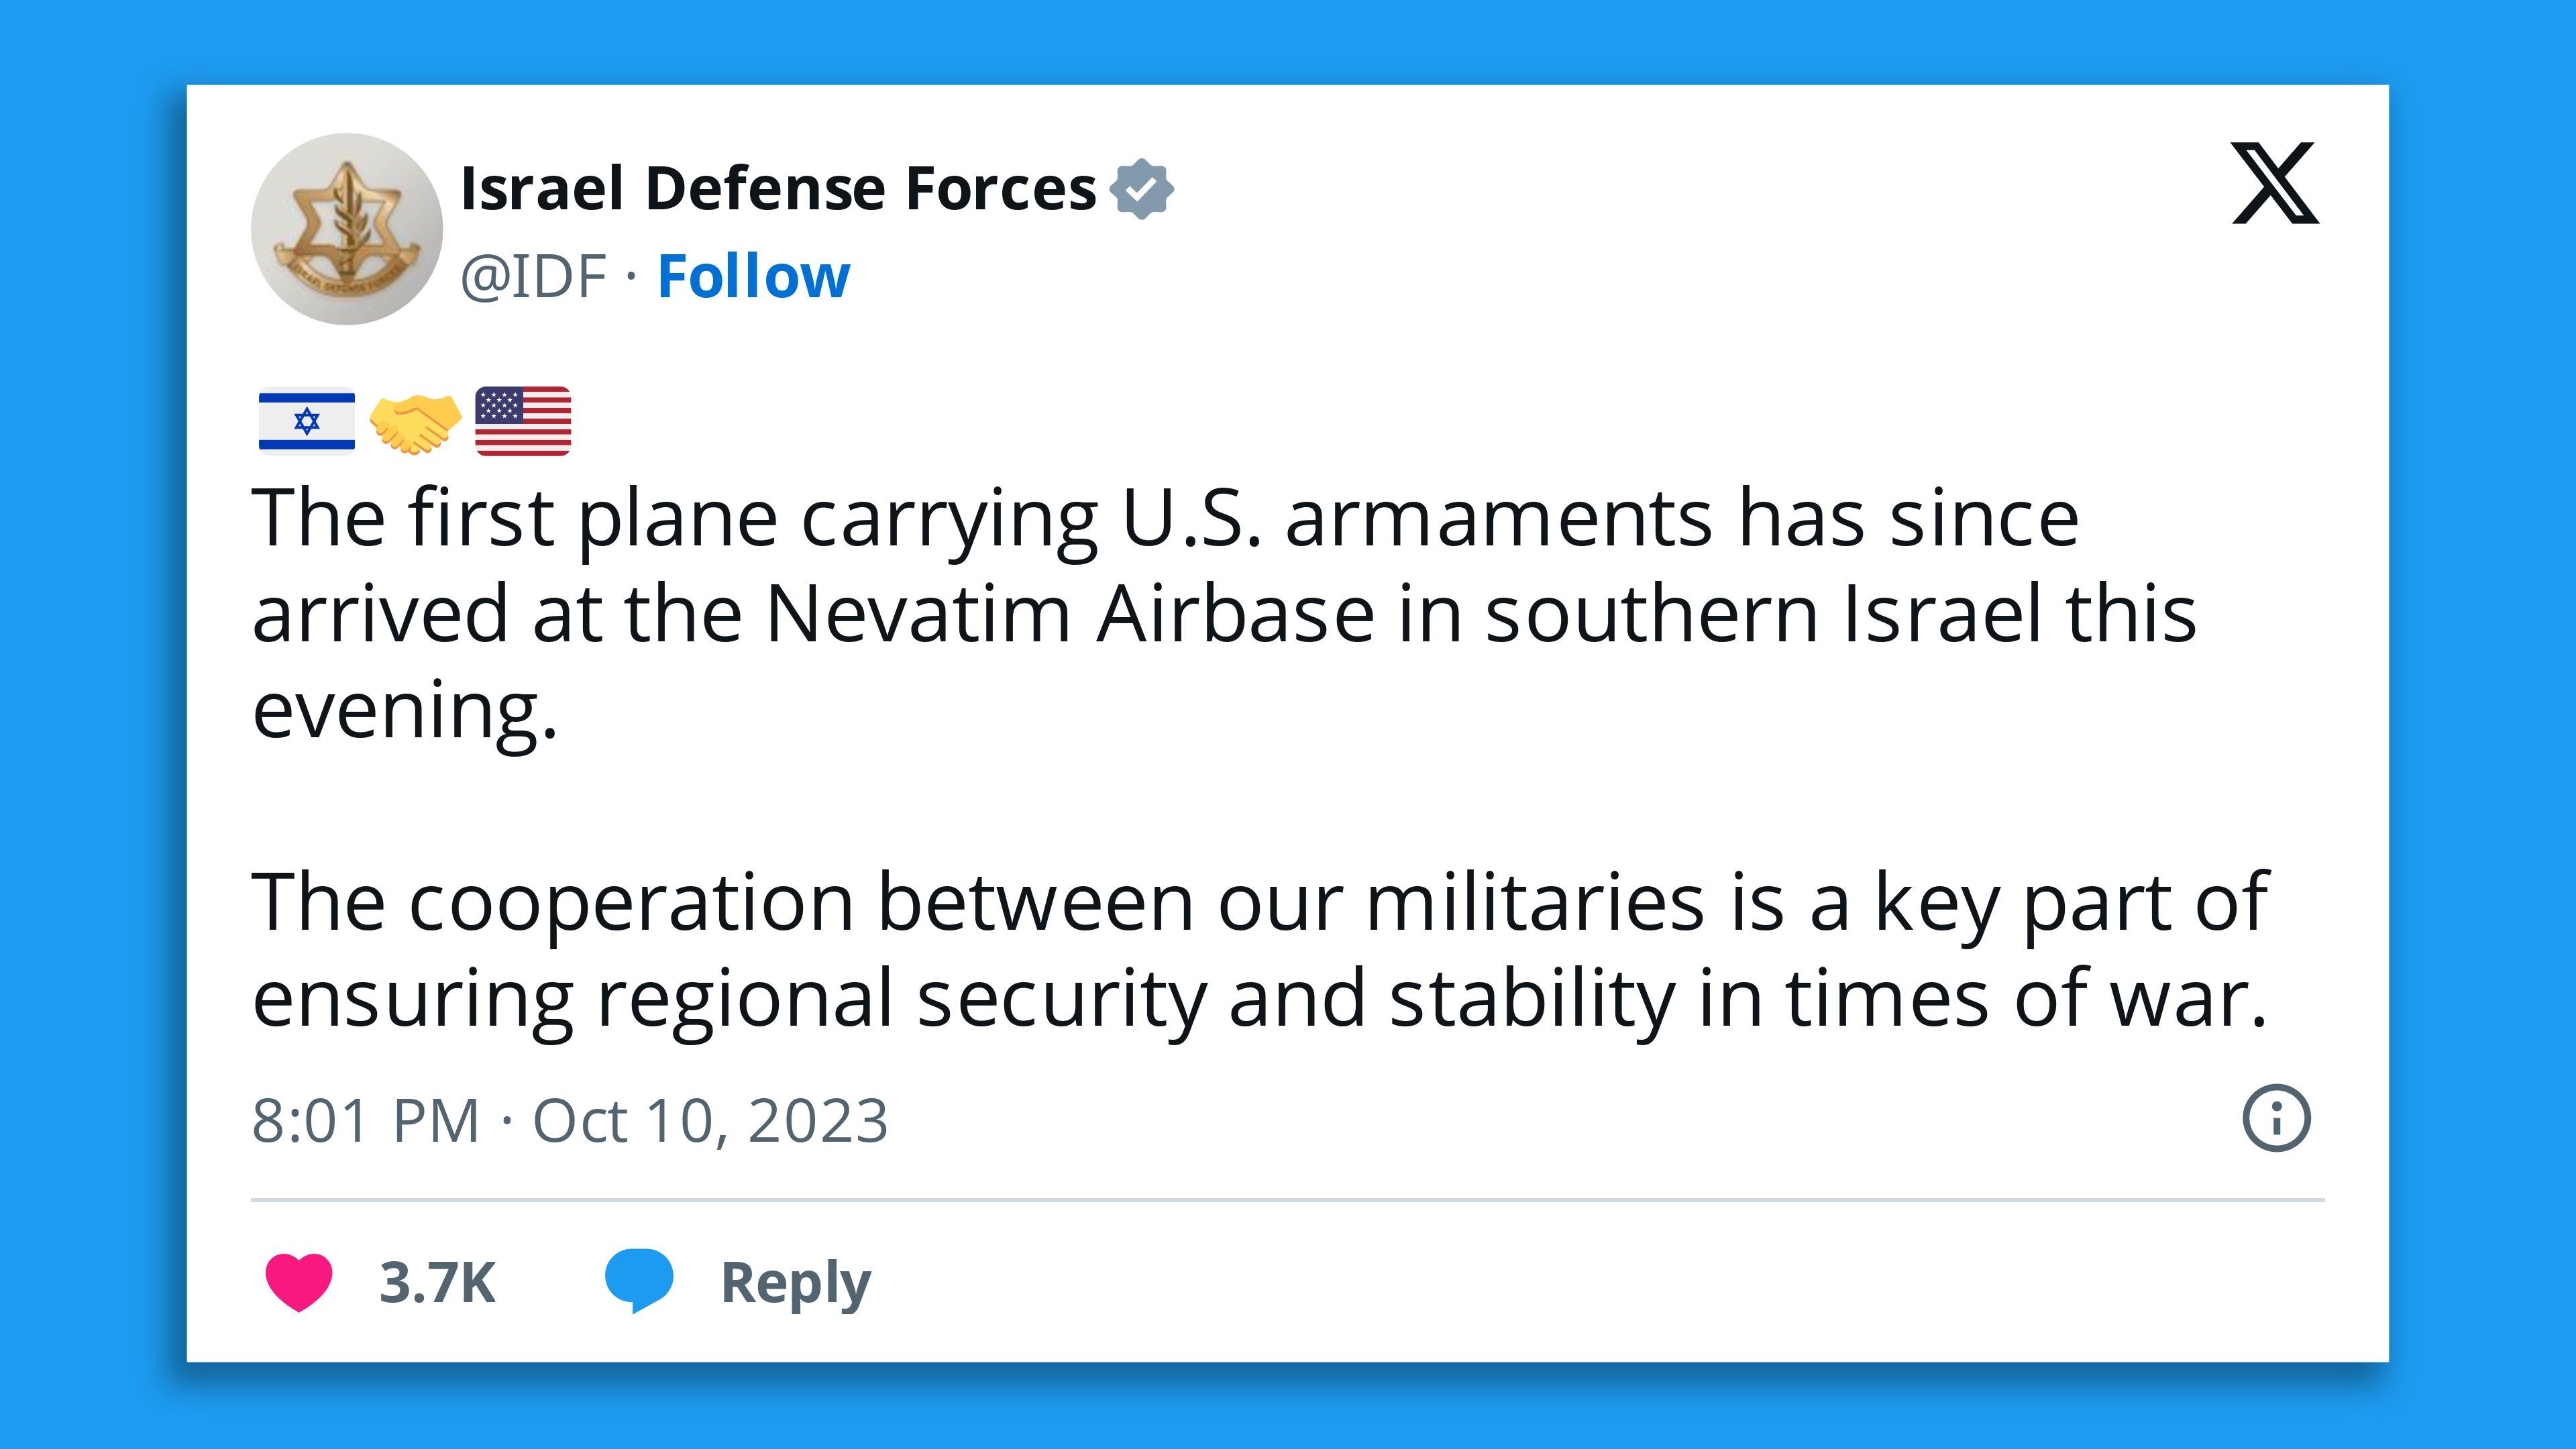 A screenshot of an Israel Defense Forces tweet, saying: " The first plane carrying U.S. armaments has since arrived at the Nevatim Airbase in southern Israel this evening.   The cooperation between our militaries is a key part of ensuring regional security and stability in times of war."